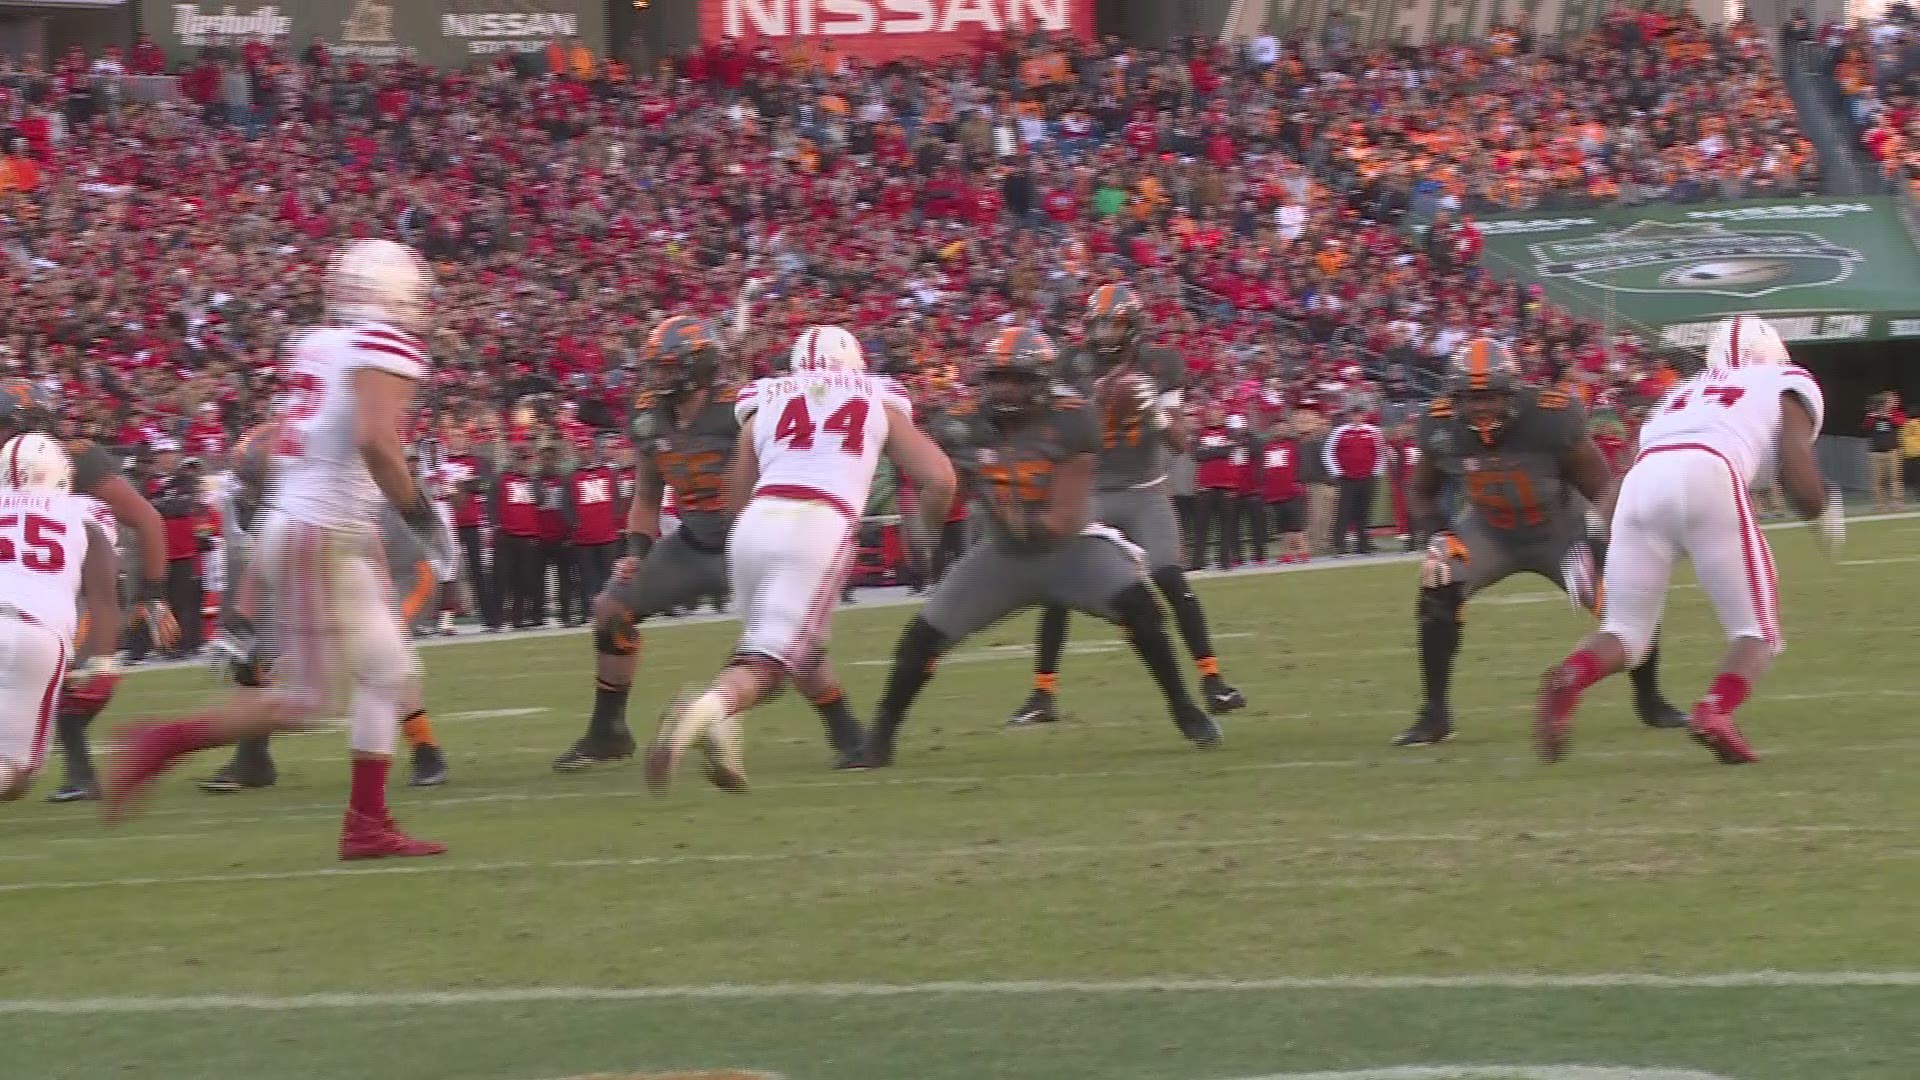 Tennessee led Nebraska 21-7 at halftime of the 2016 Music City Bowl.